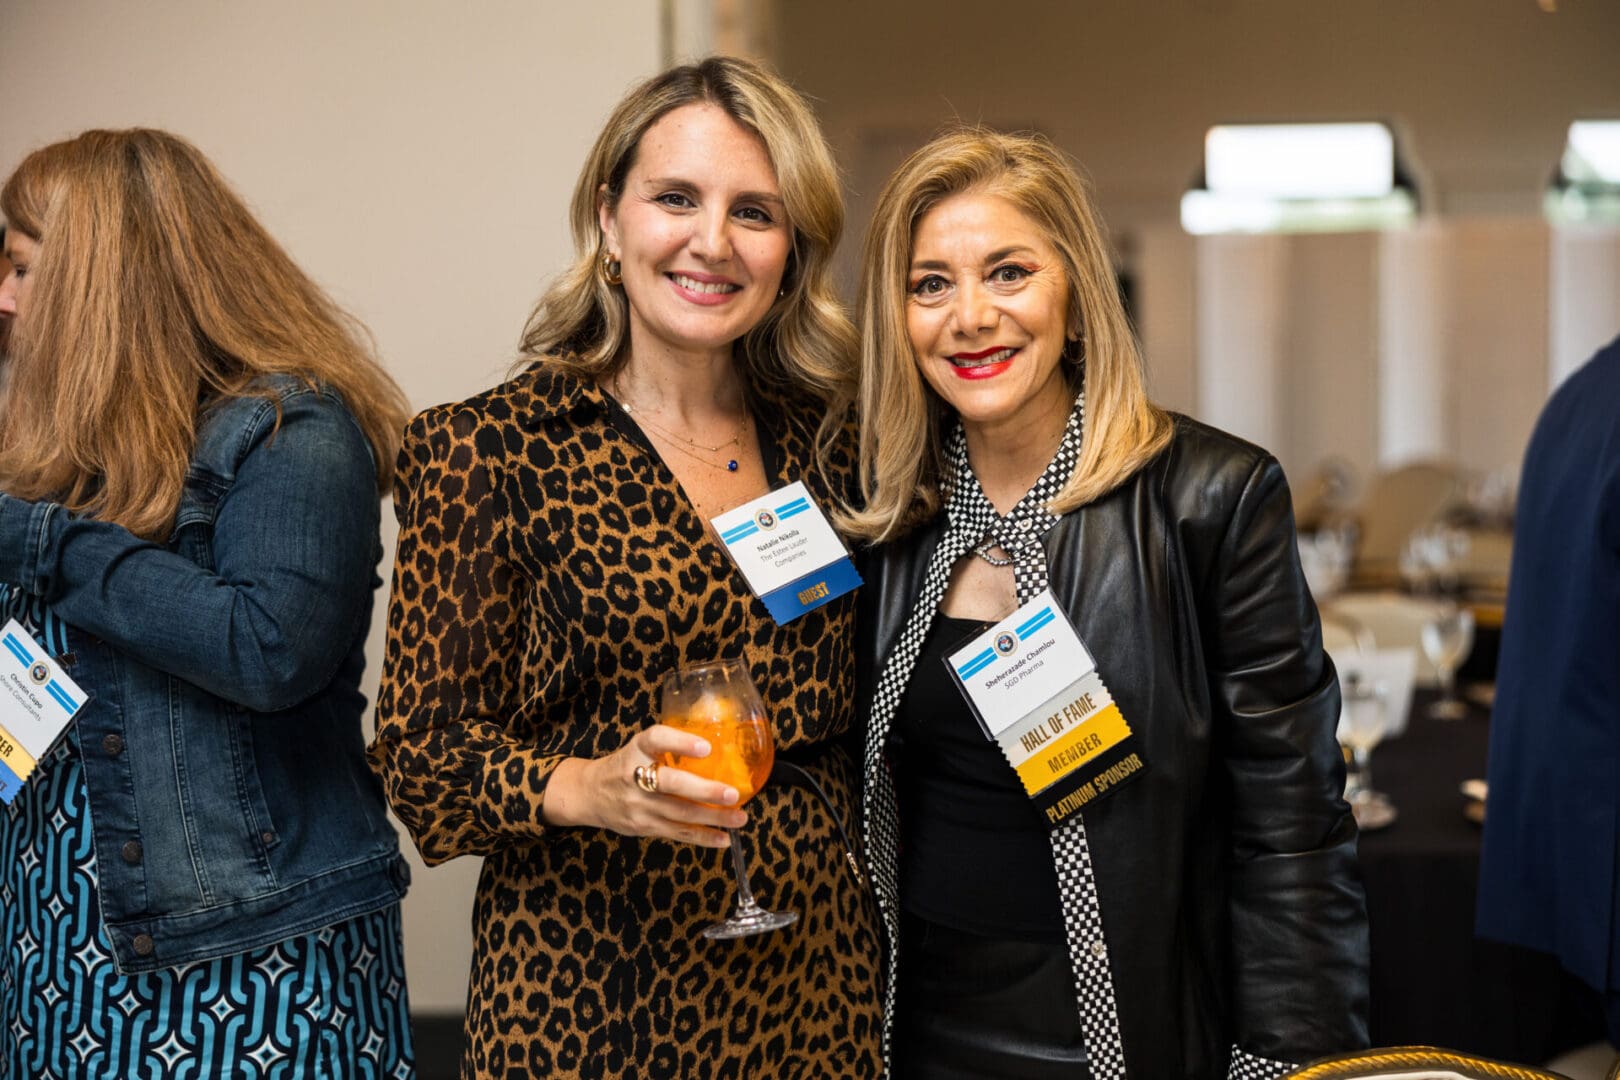 Two women in business attire smiling at a networking event.